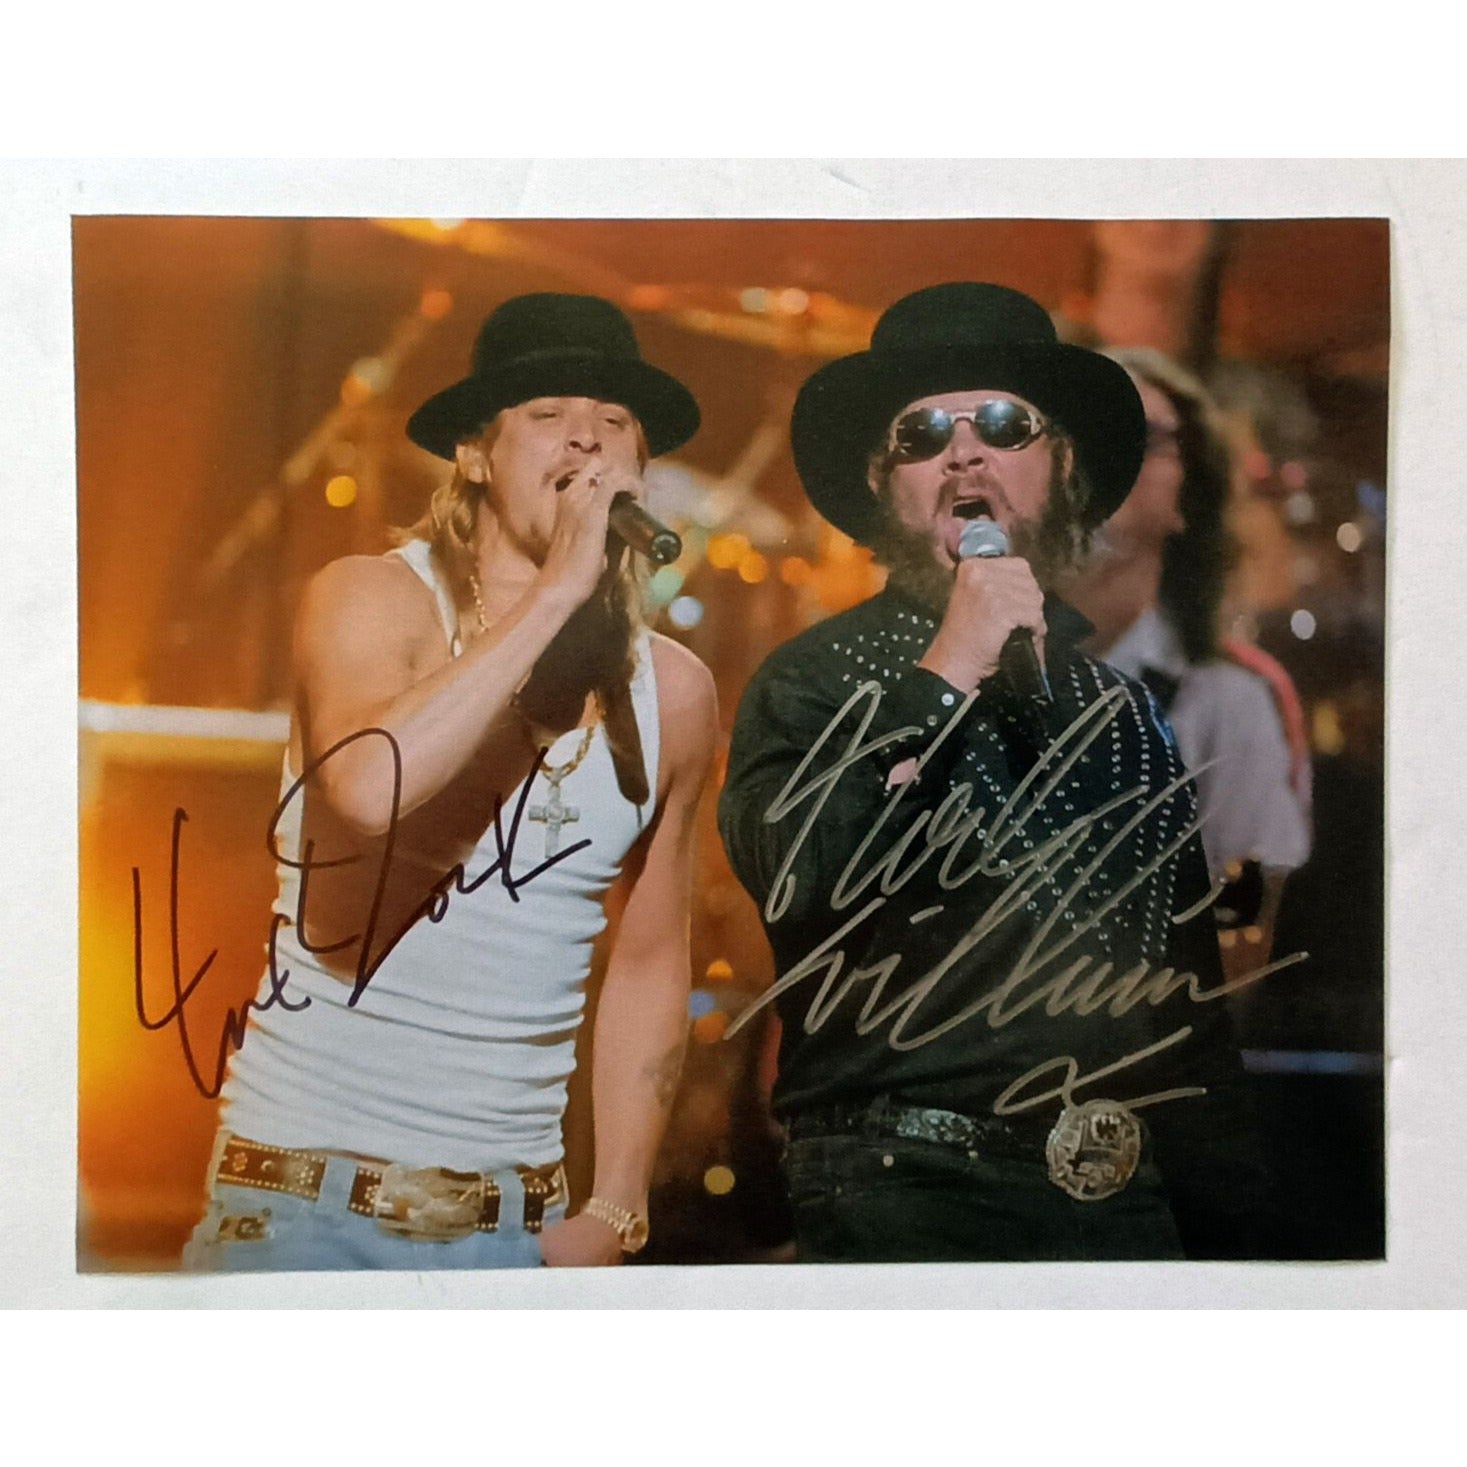 Hank Williams Jr. and Kid Rock 8x10 photo signed with proof